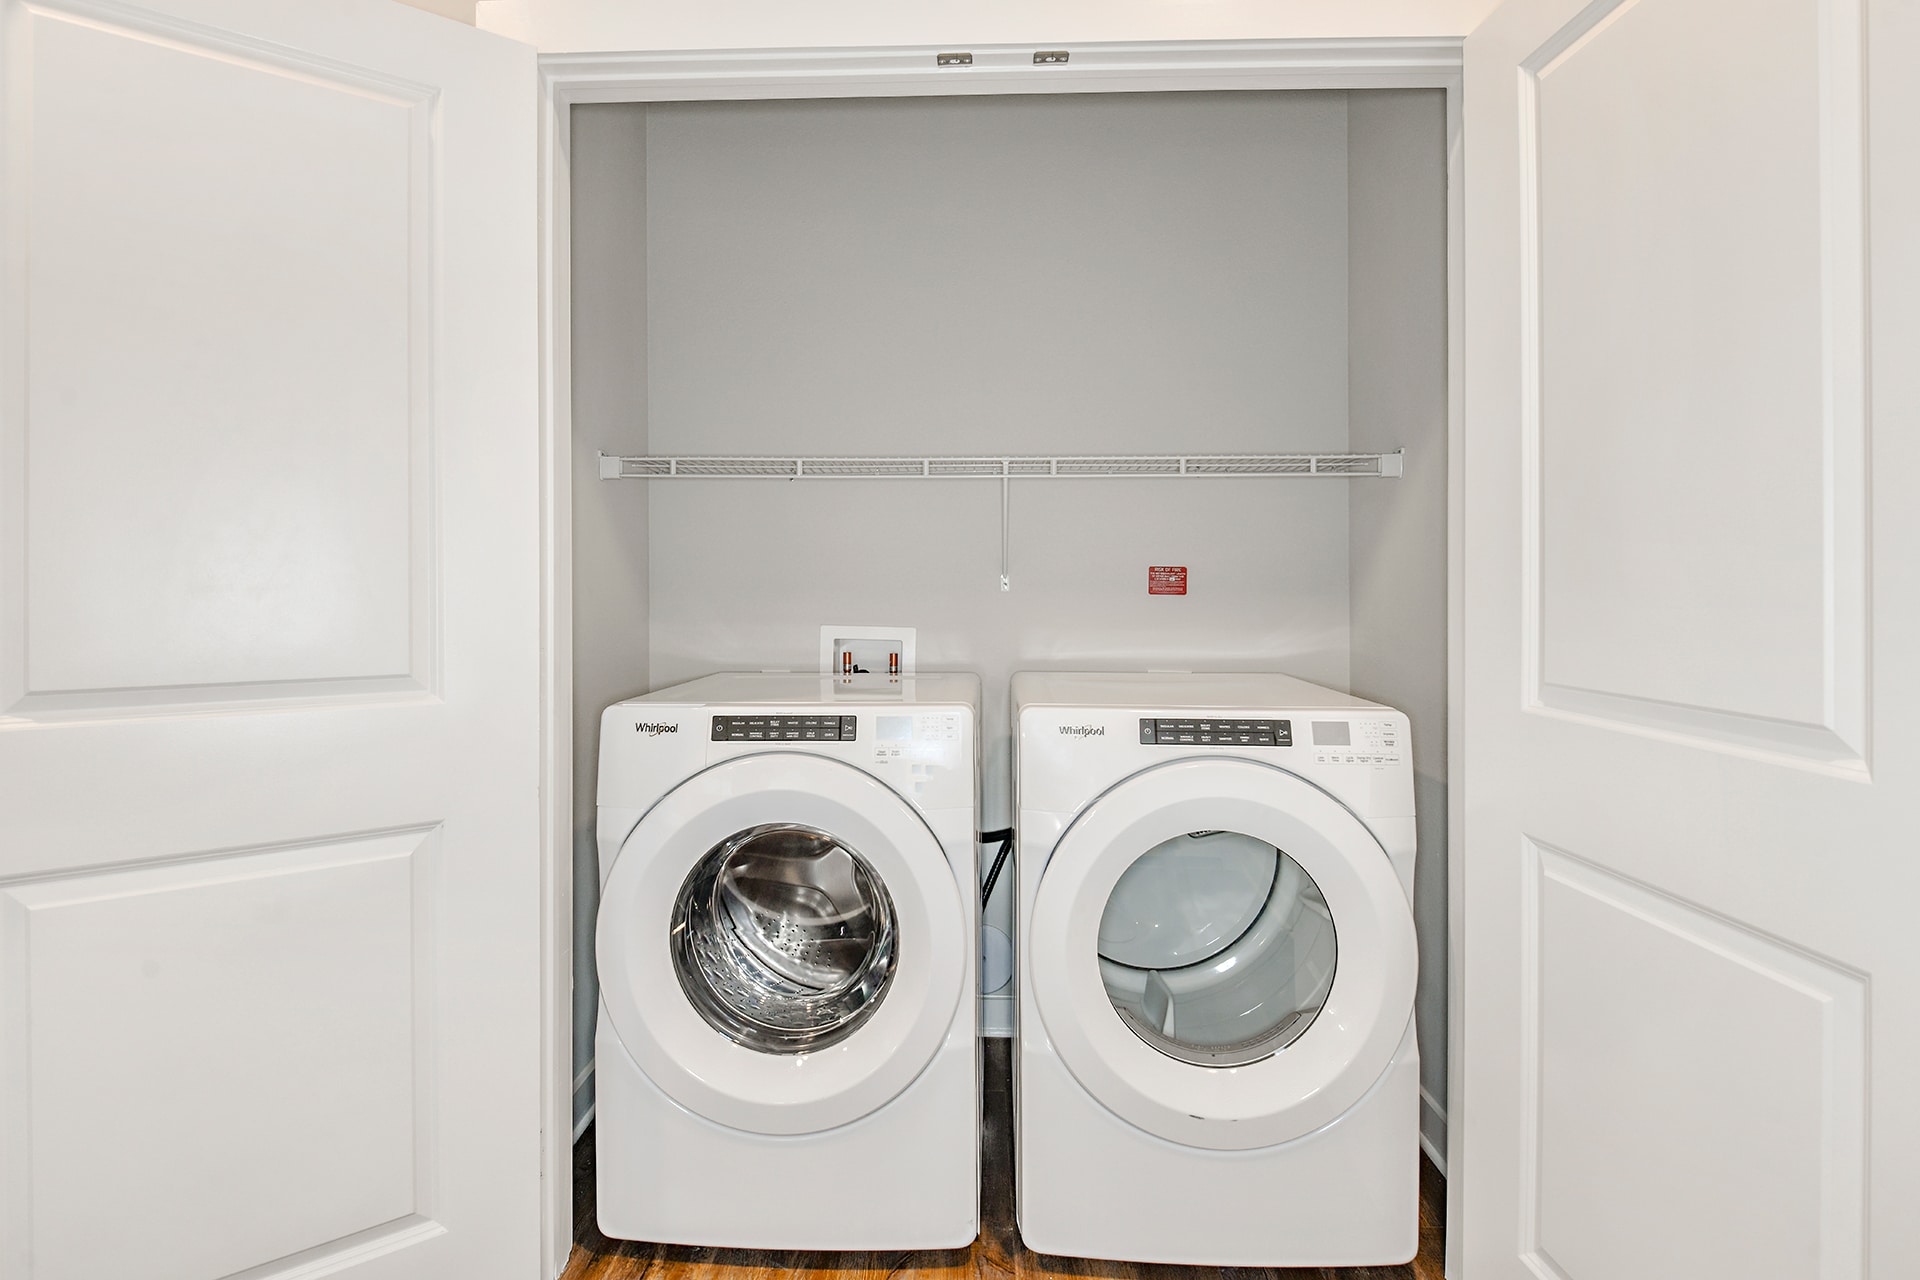 A laundry room with two washers and dryers.